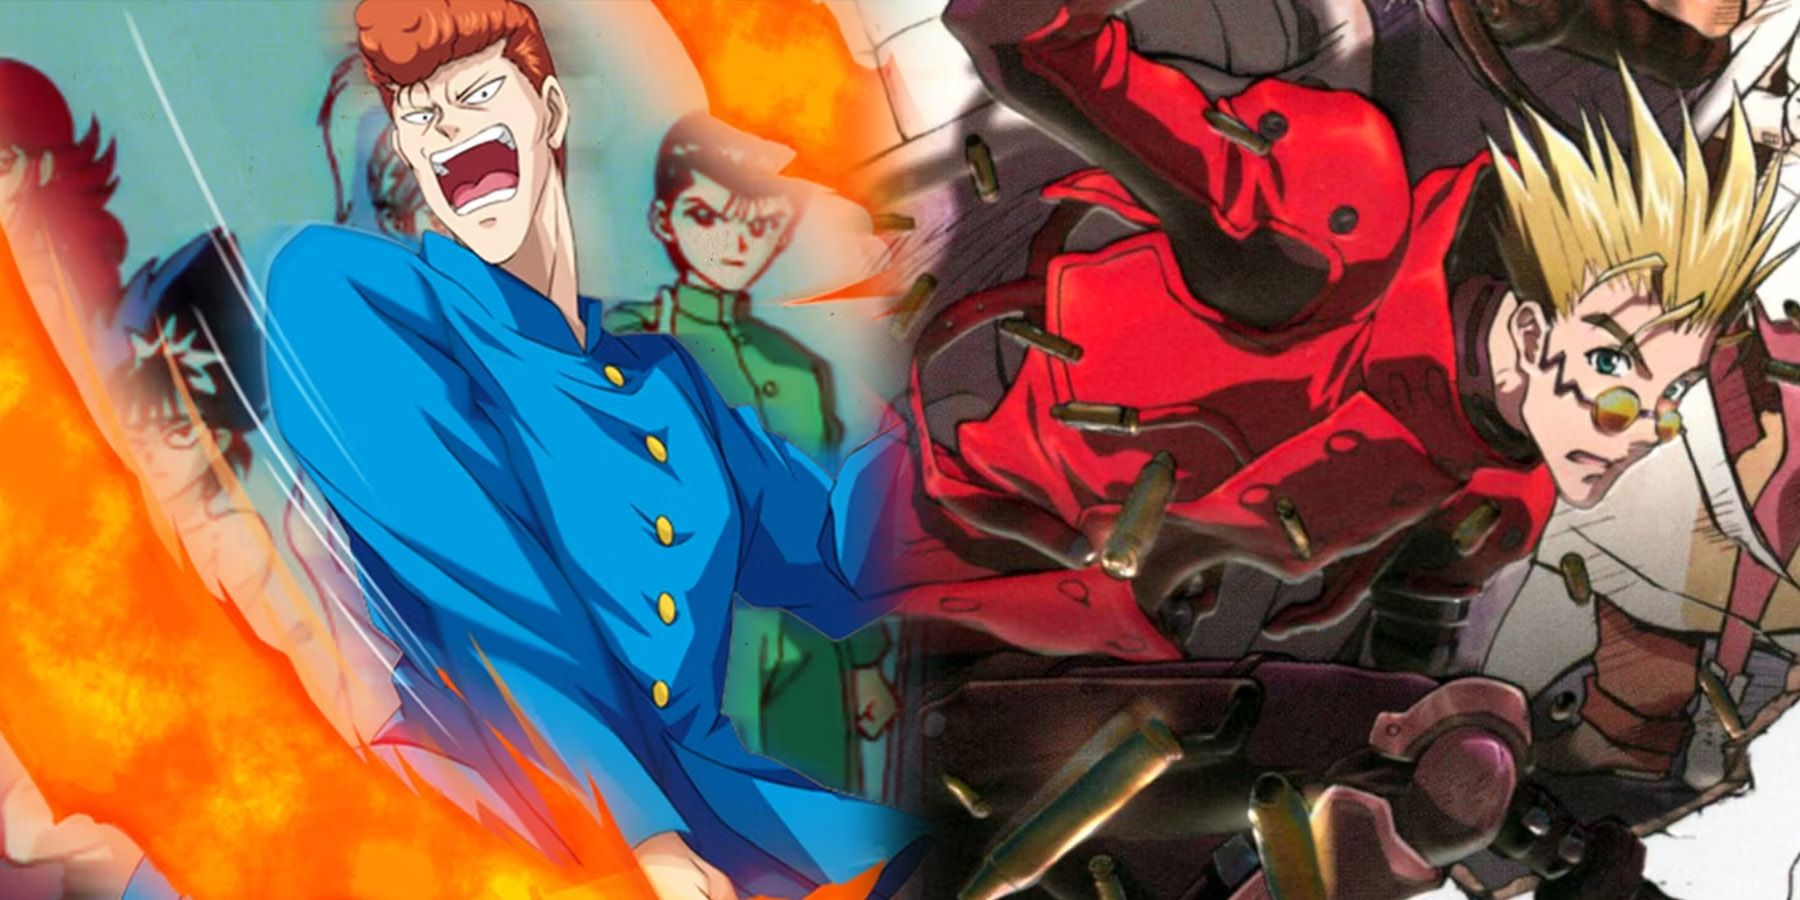 Honorable Anime Characters Header Image With Kuwabara And Vash The Stampede